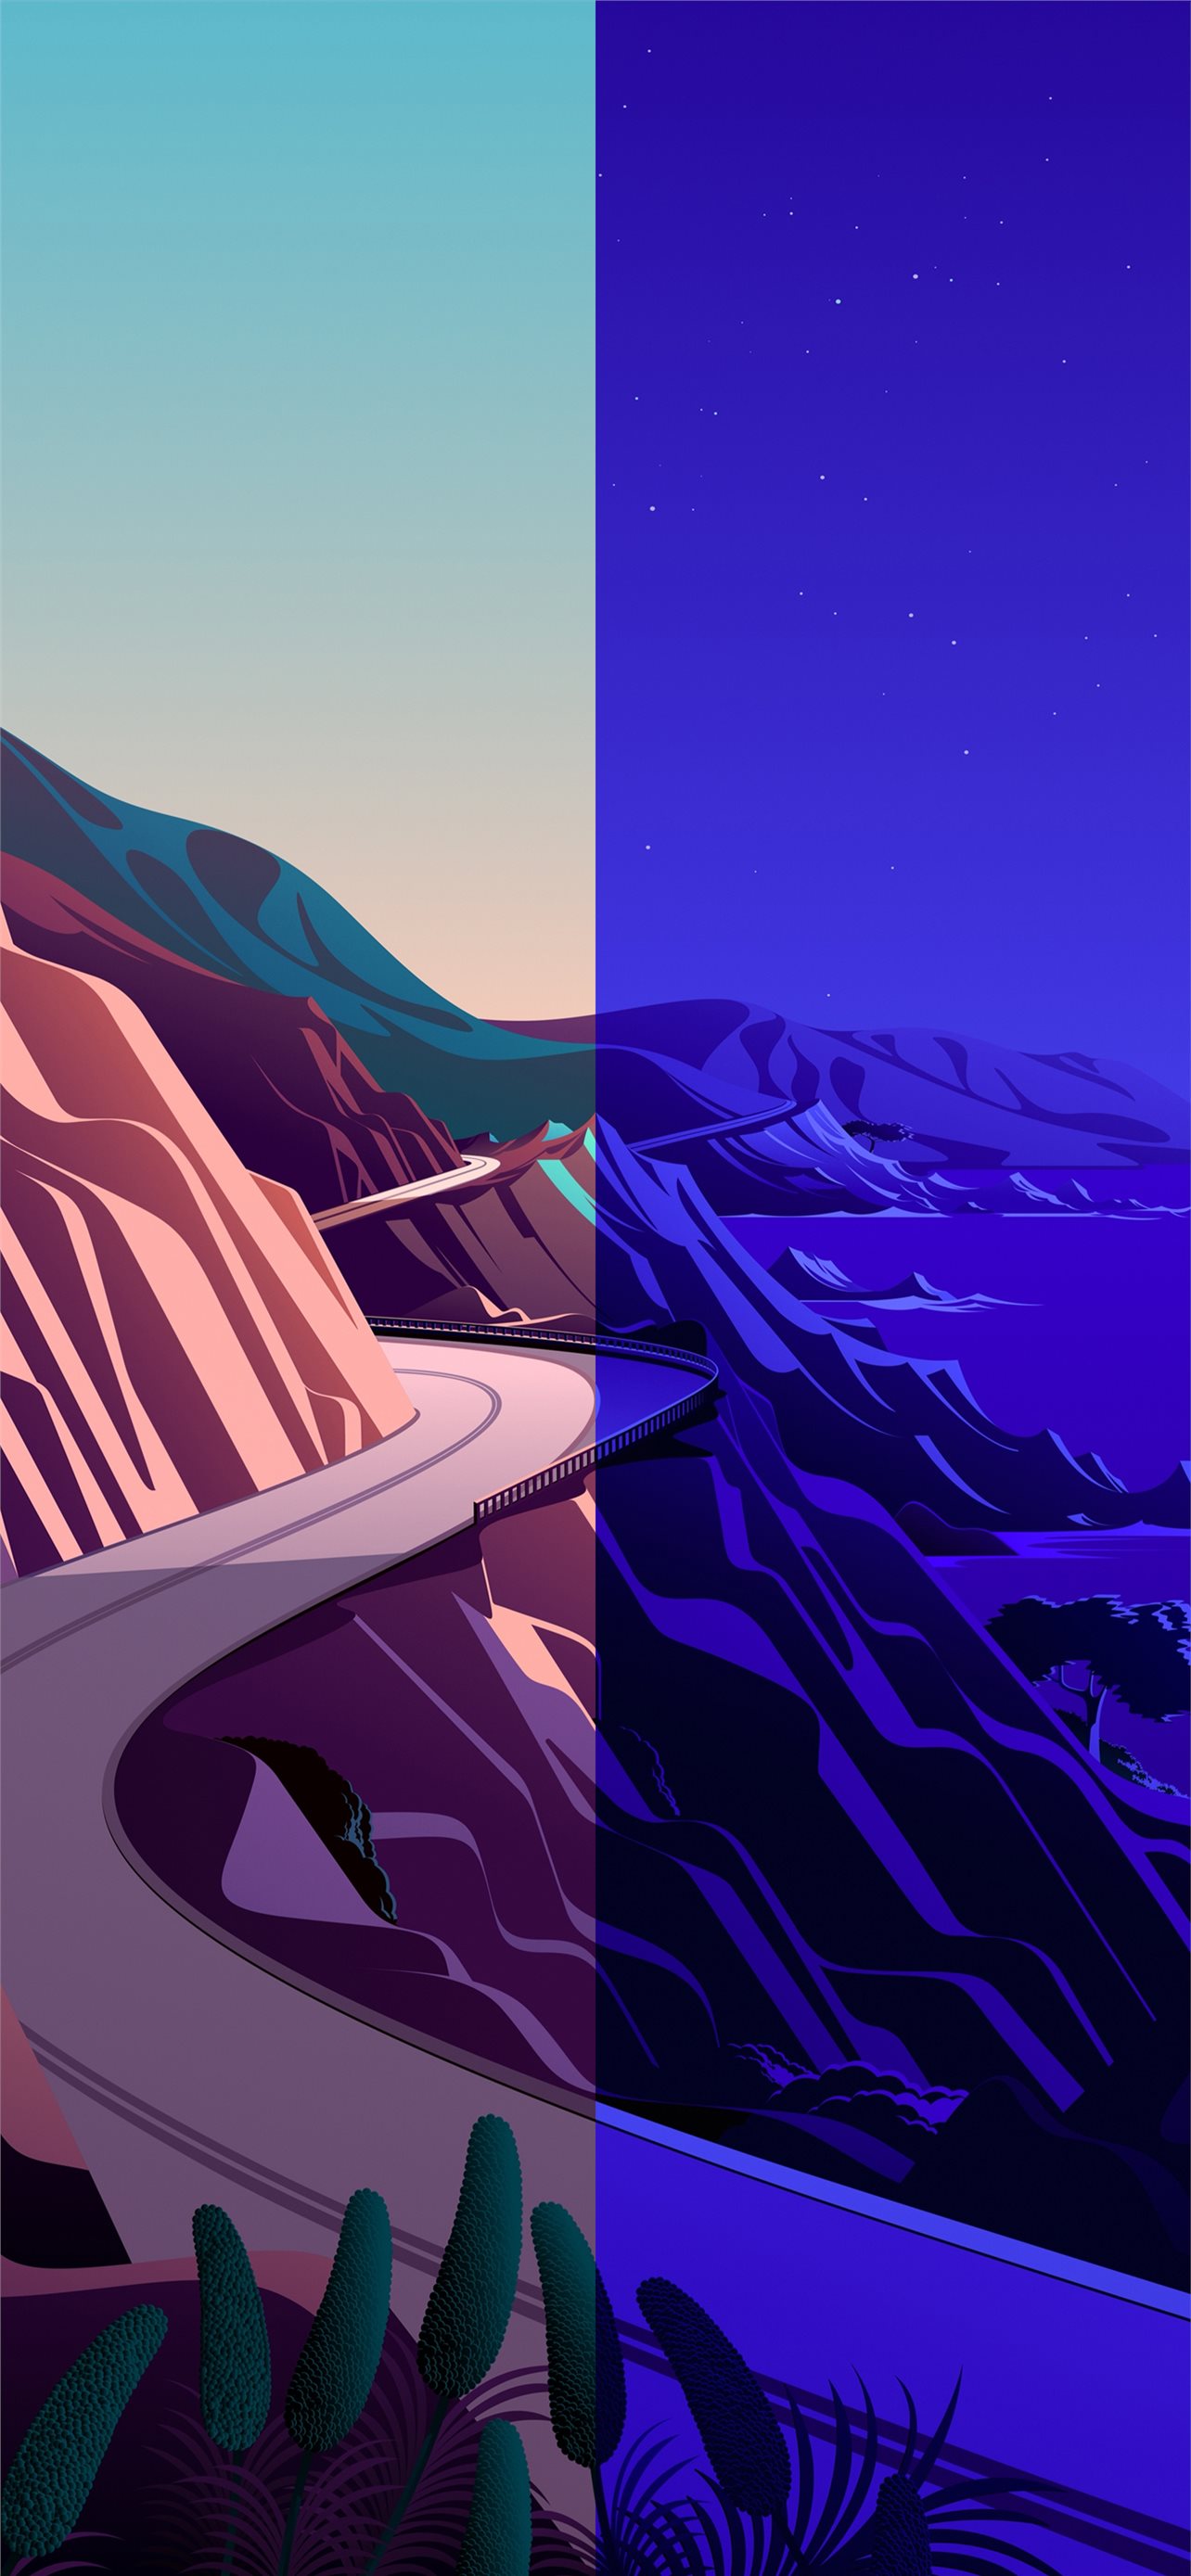 Breathtaking Mountain Cliff Scenery for iPhone